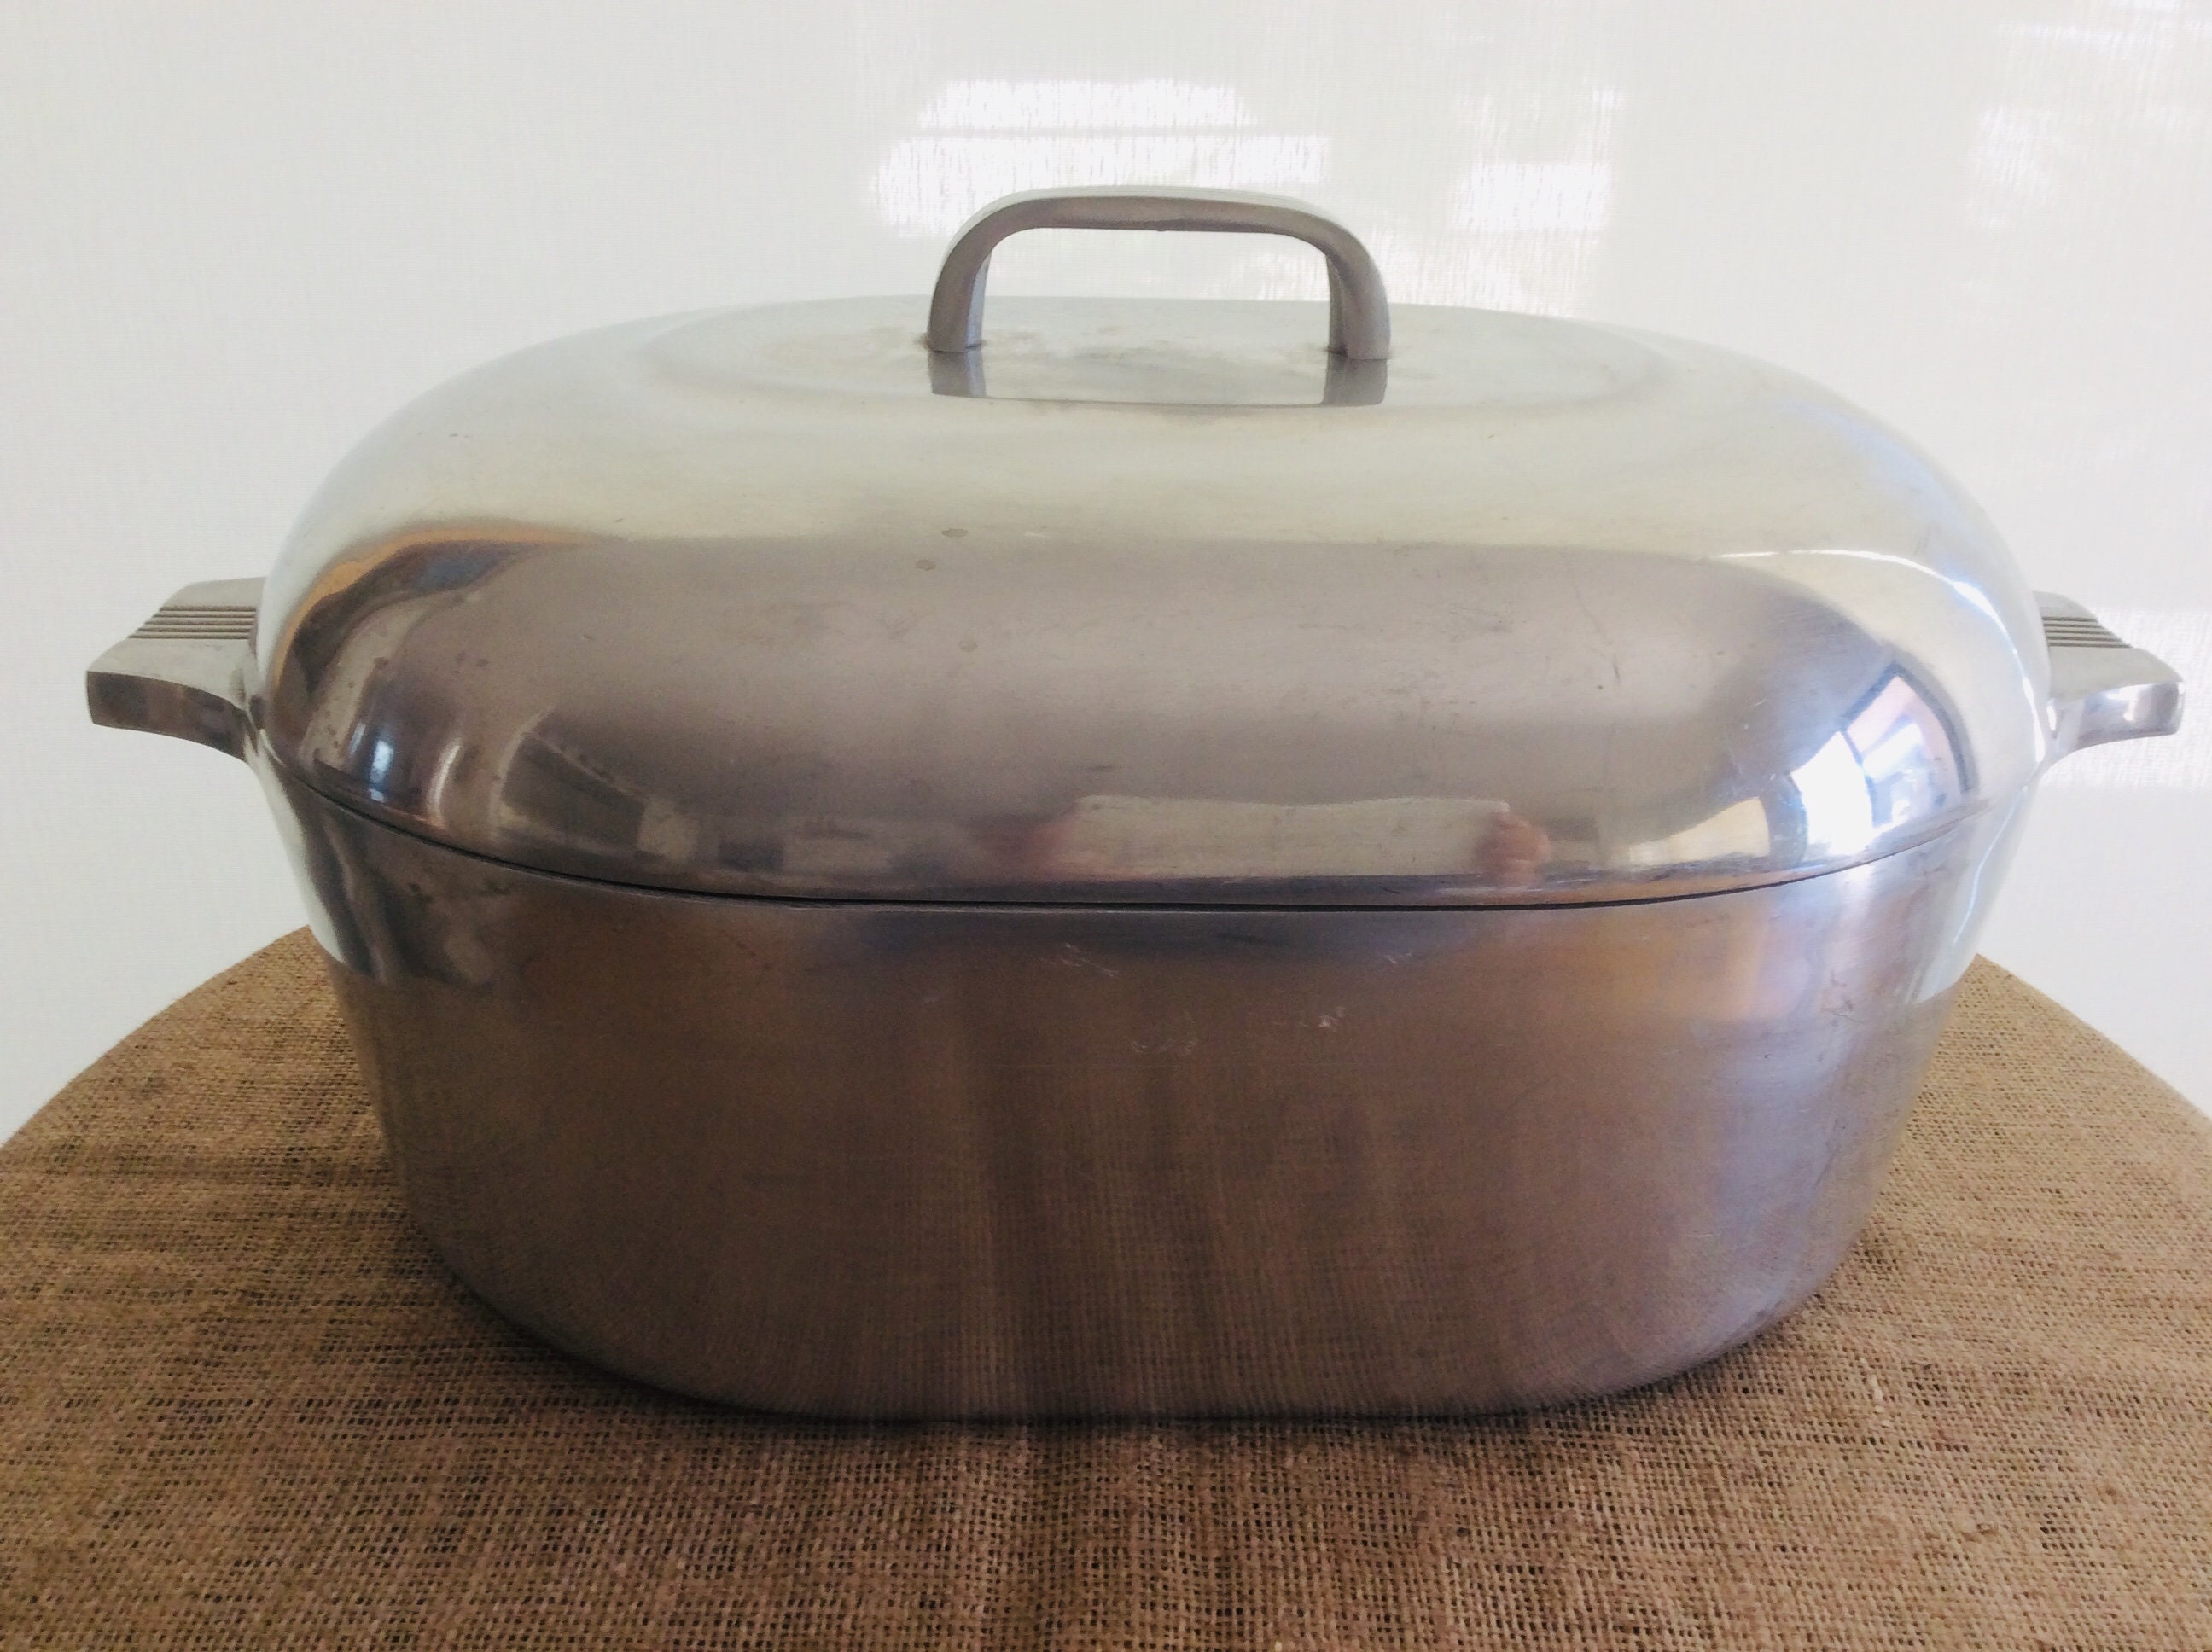 MAGNALITE GHC Wagner Ware 13 QT Oval Roaster